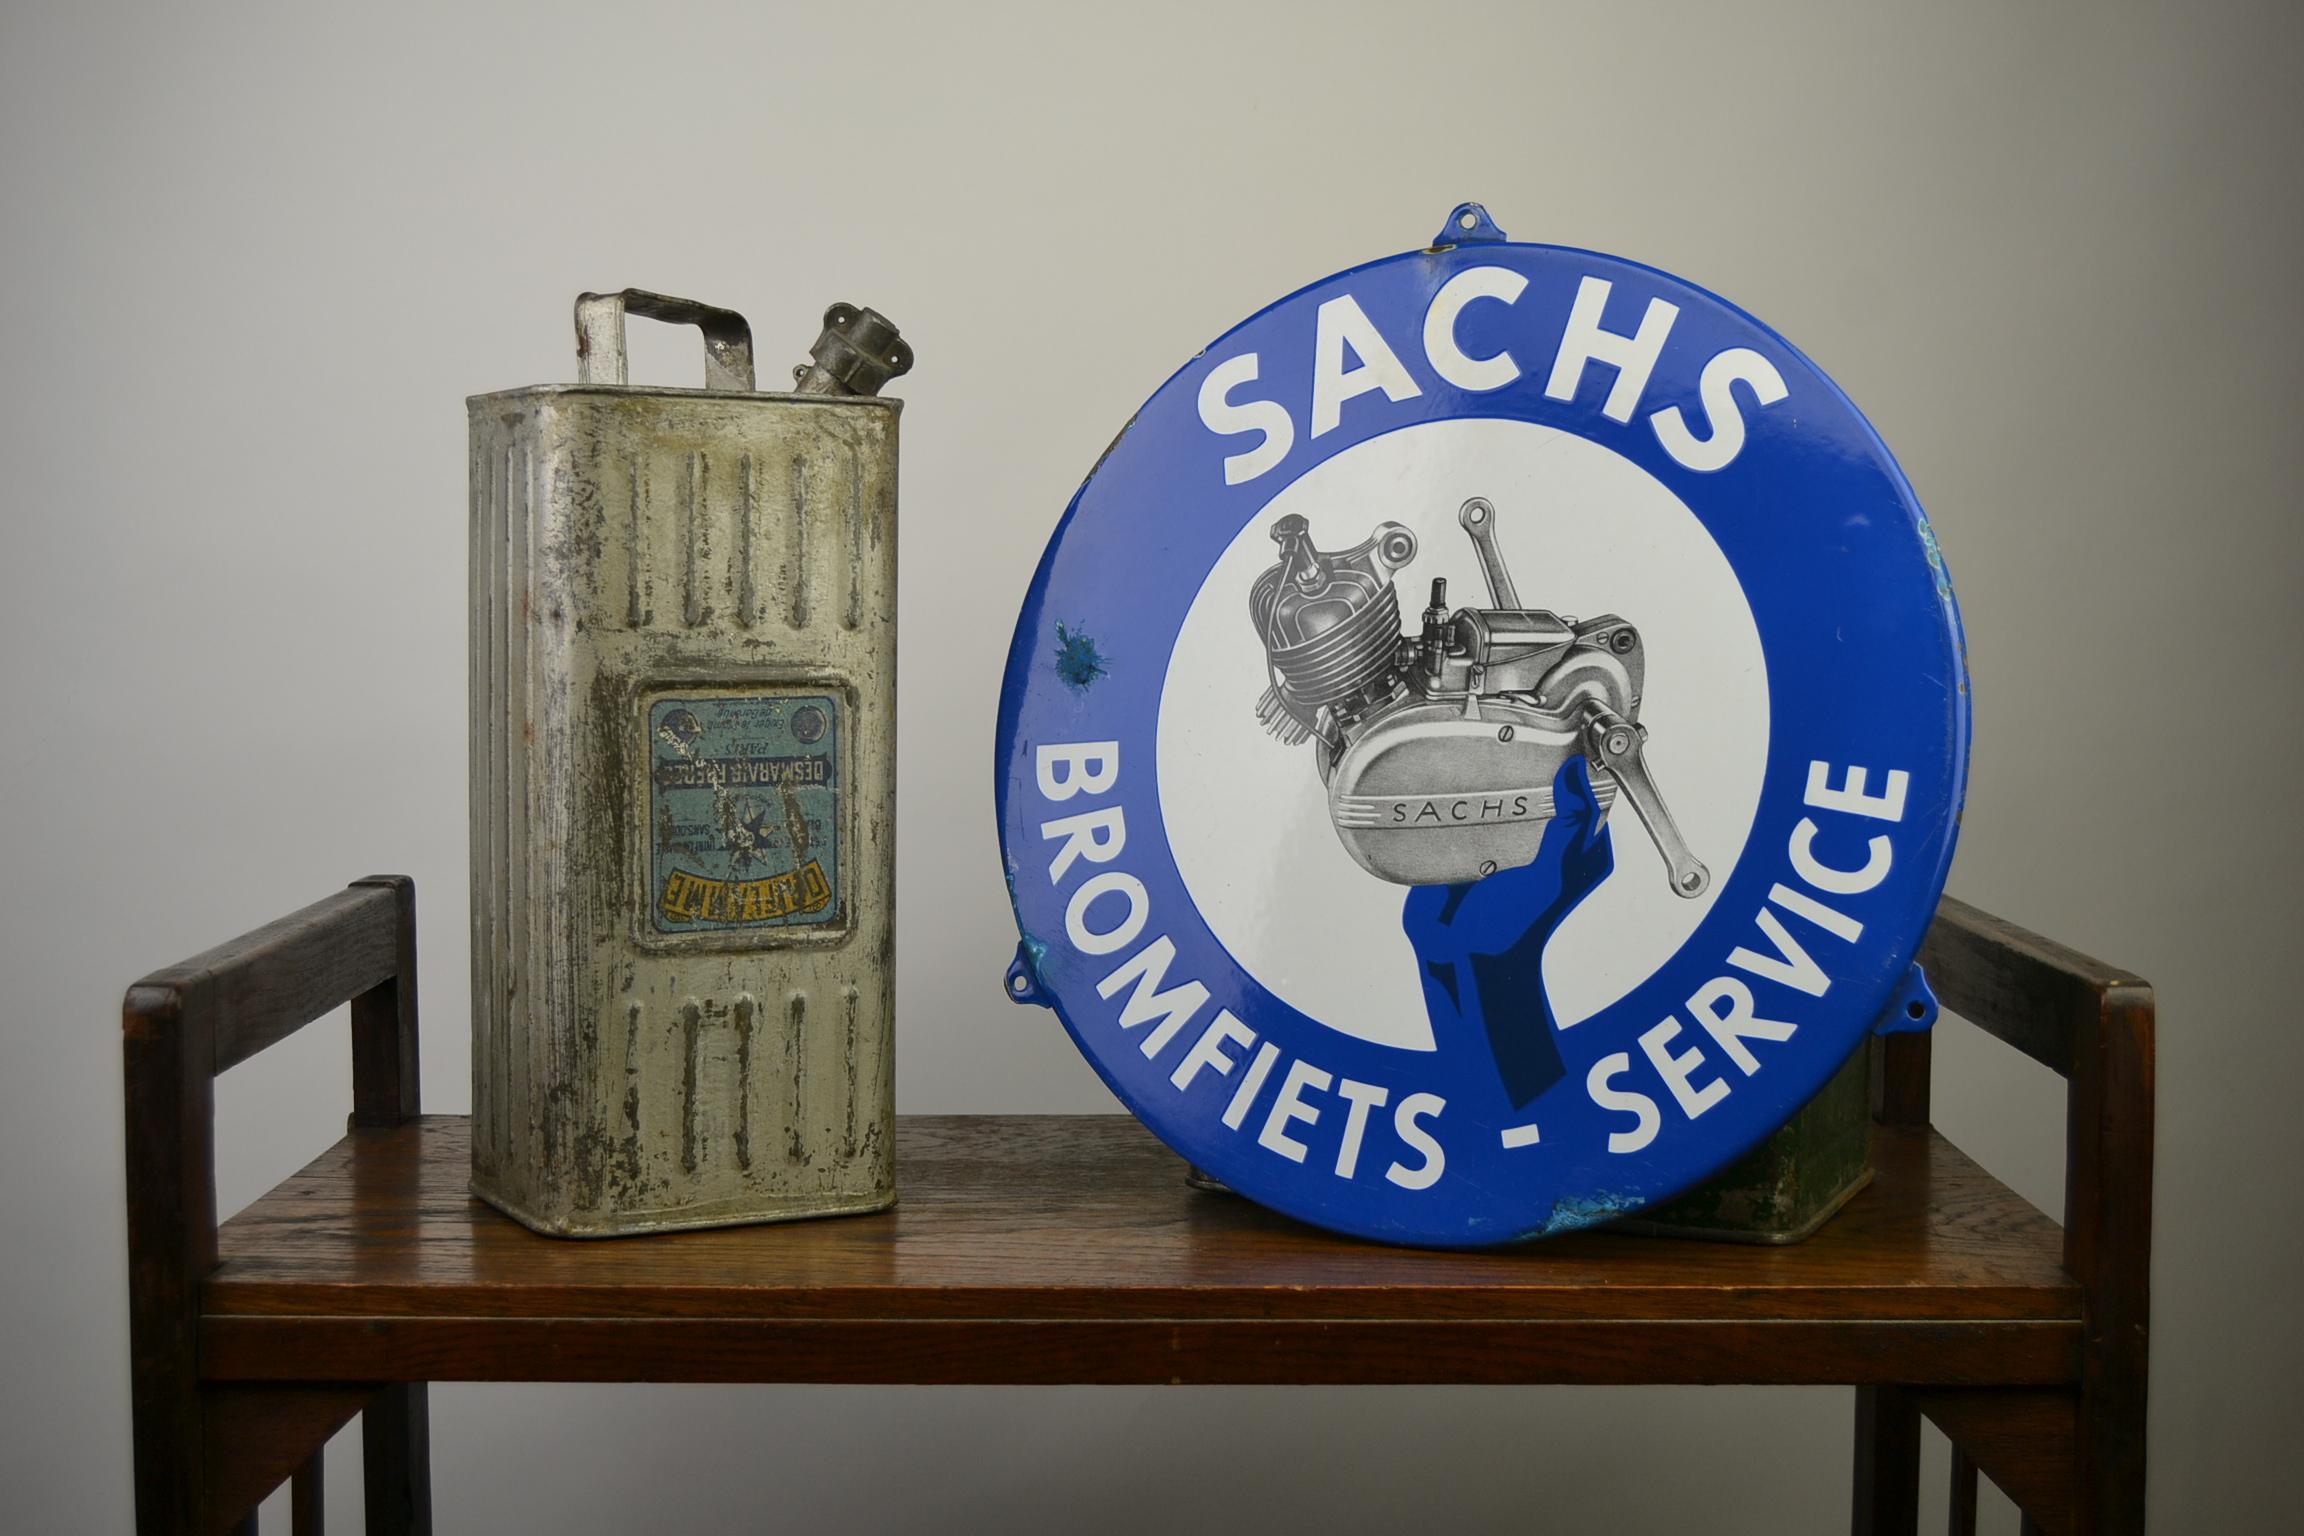 Rare enamel publicity sign for Sachs Motor Block 49cc.
This porcelain advertising signs were hanging by the Repair Service Points for Mopeds.
Beautiful bright blue and white colors and great picture of a very detailed Motorblock in a human